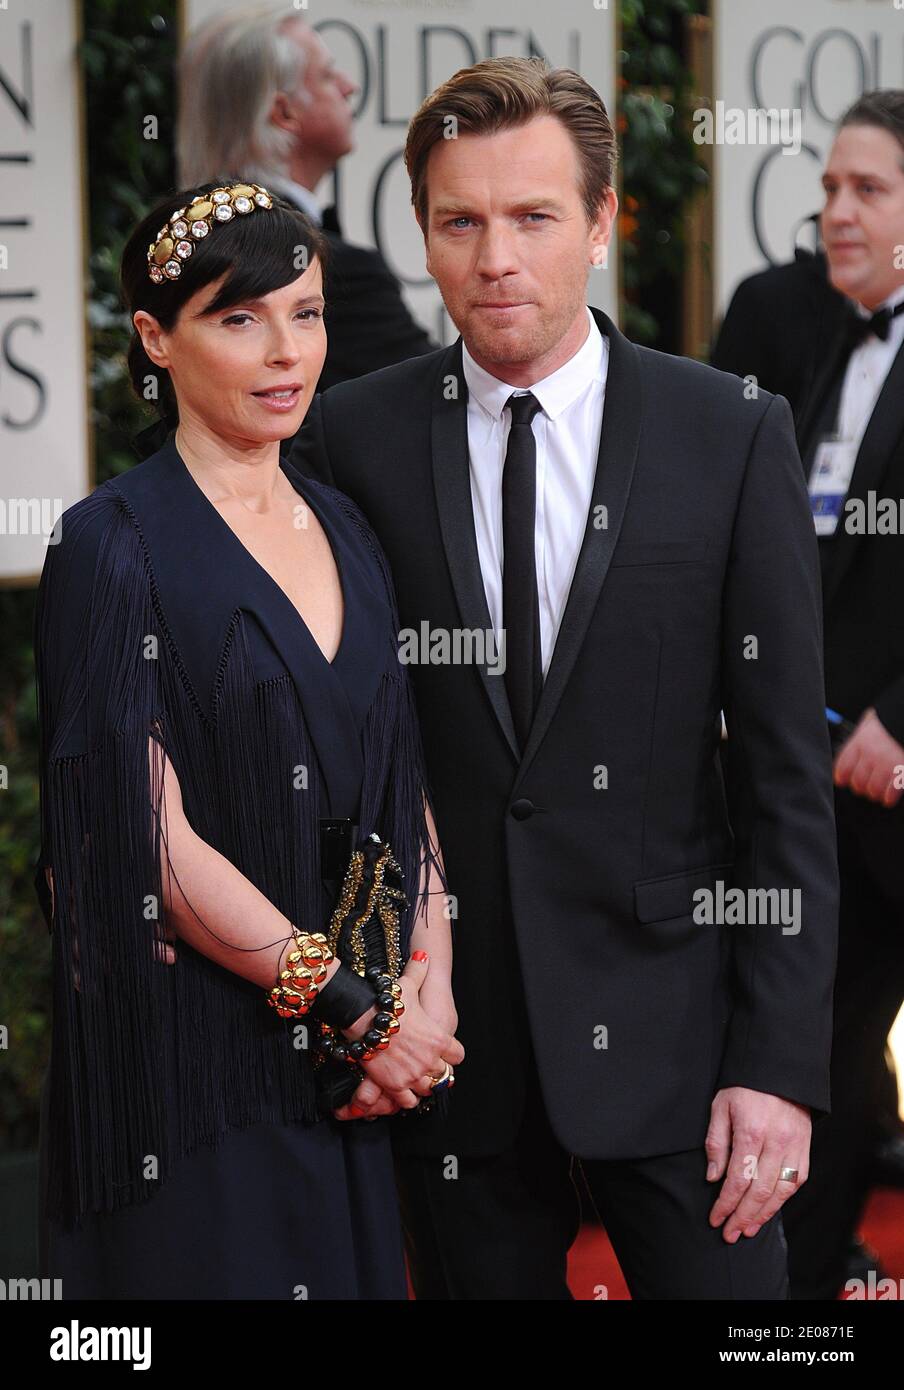 Ewan McGregor and wife Eve arriving for the 69th Annual Golden Globe Awards Ceremony, held at the Beverly Hilton Hotel in Los Angeles, CA, USA on January 15, 2012. Photo by Lionel Hahn/ABACAPRESS.COM Stock Photo